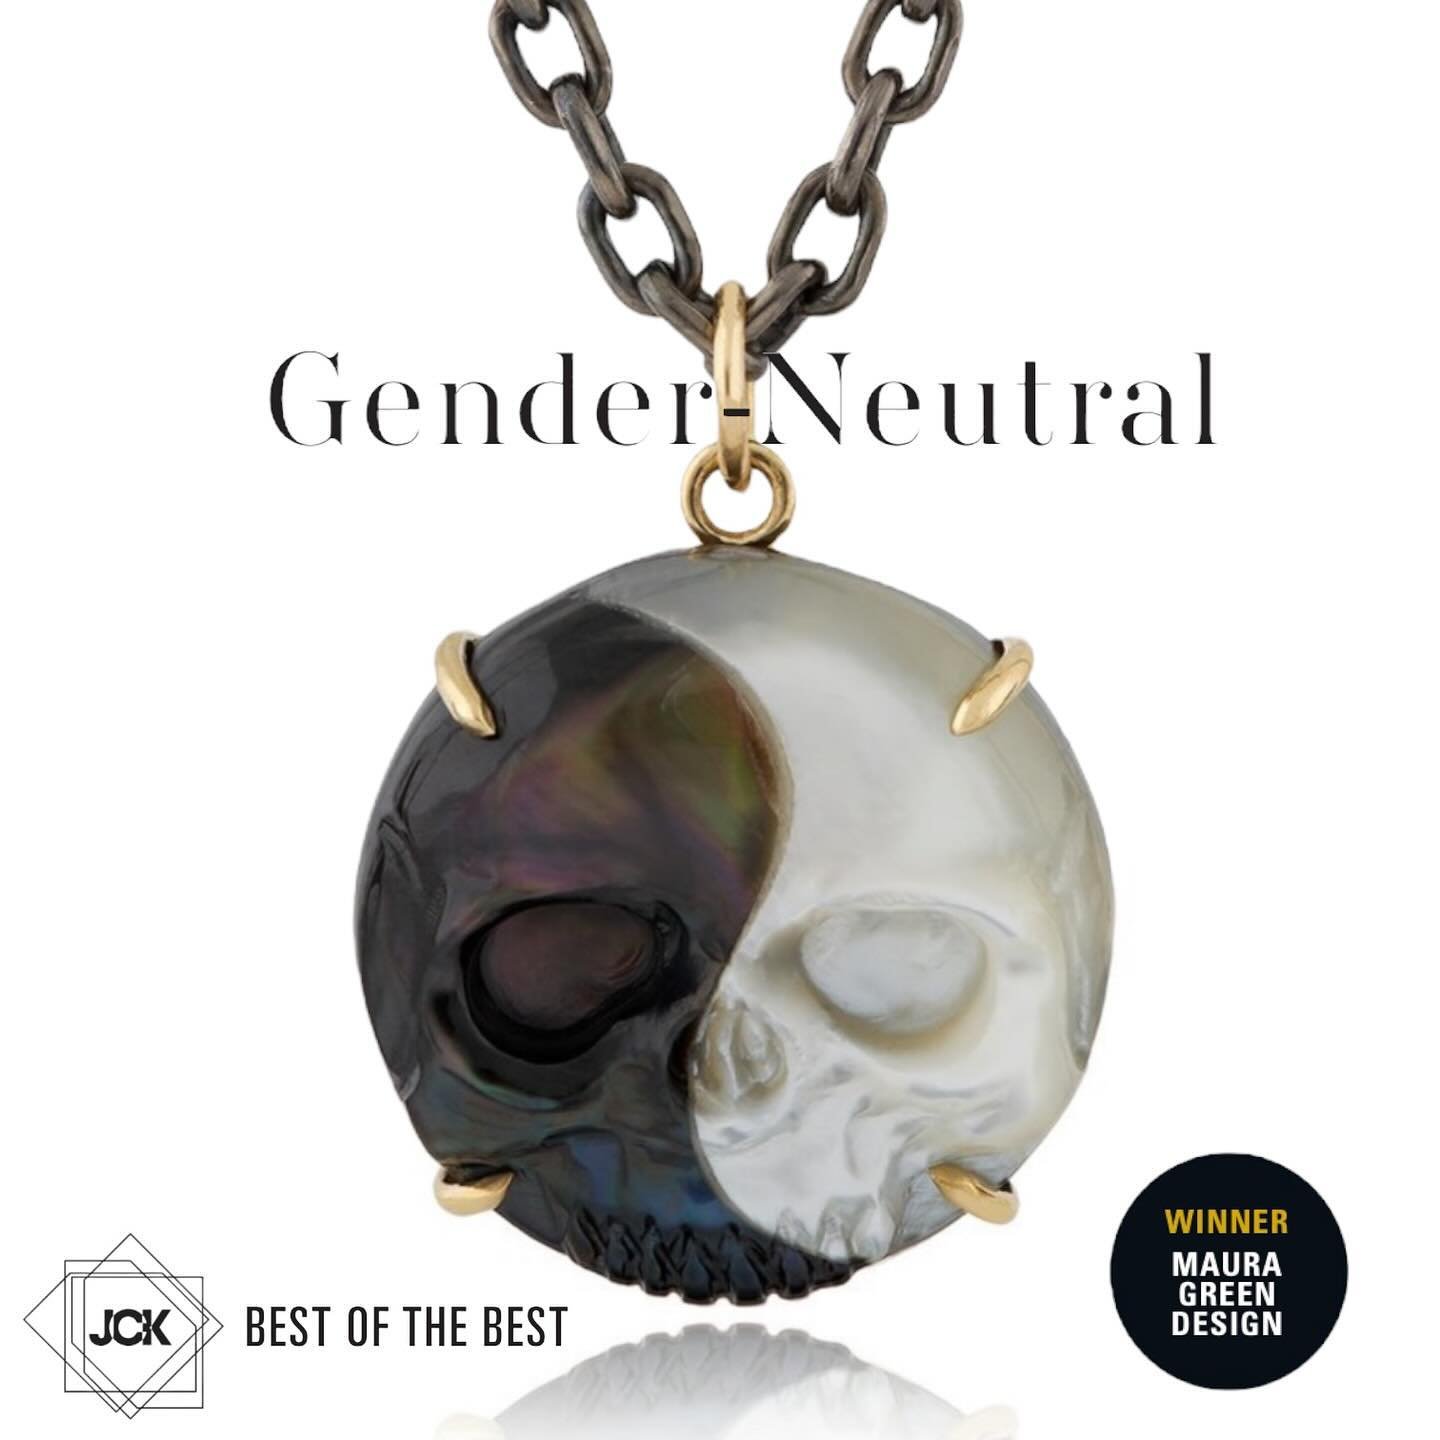 Thrilled that our Skull Yin Yang has won 1st place in JCK magazine&rsquo;s &lsquo;Best of the Best&rsquo; Design Competition in the &lsquo;Best Gender Neutral Jewelry&rsquo; category. 

#mauragreen #mauragreenjewelry #jck #designawards #yinyang #skul